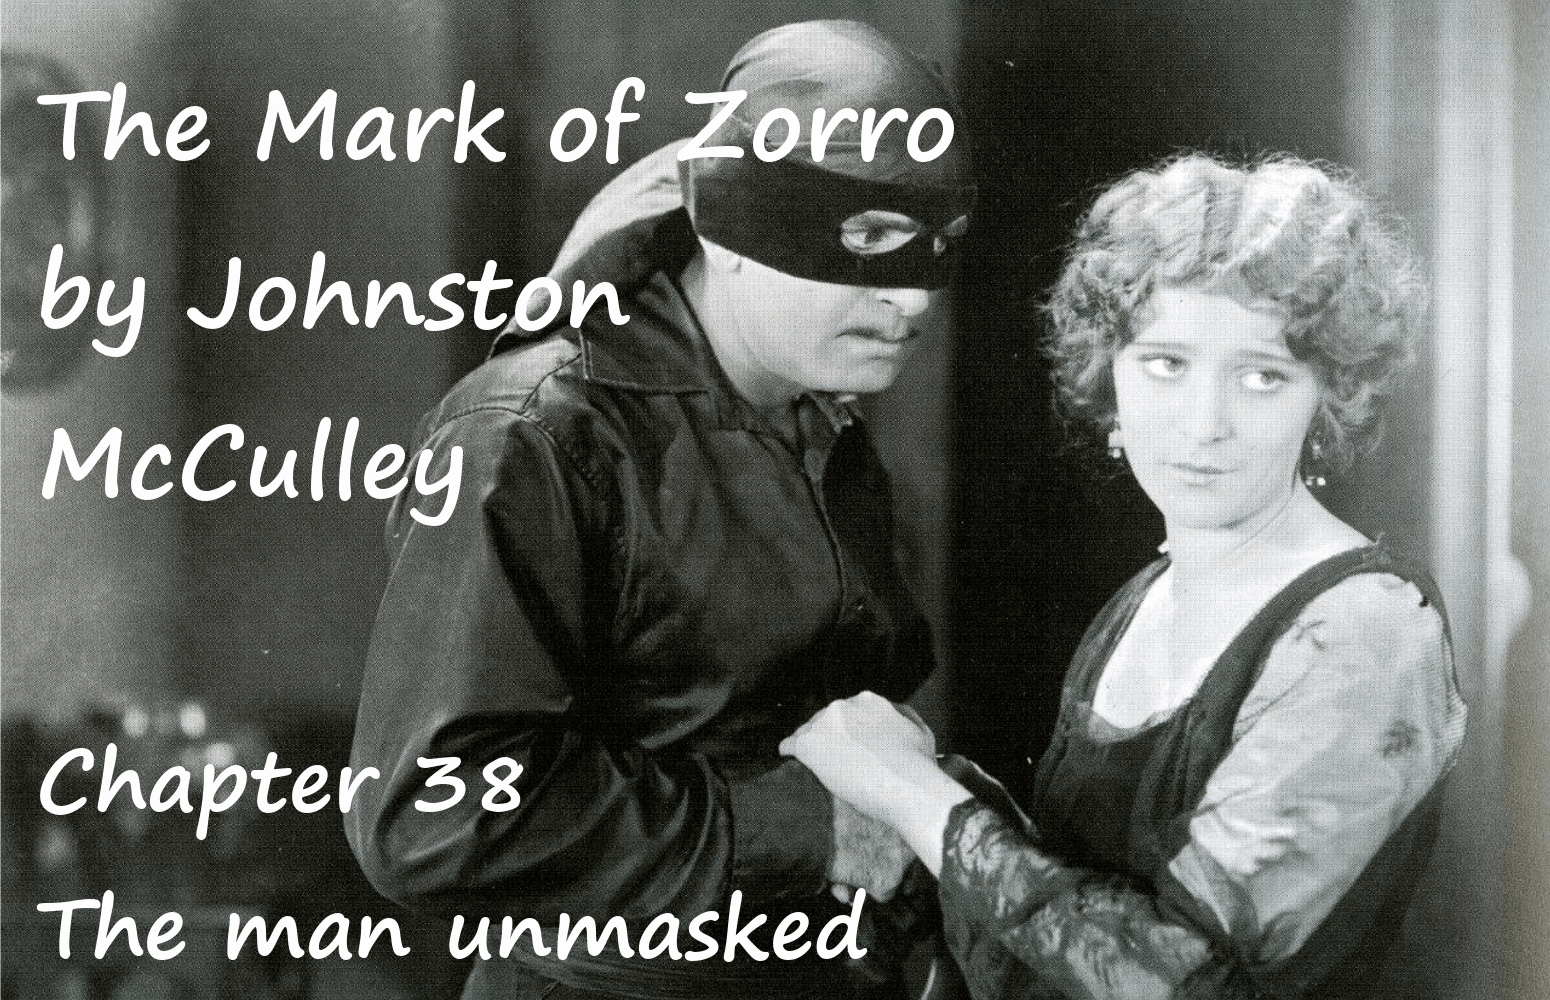 The Mark of Zorro chapter 38 The man unmasked by Johnston McCulley